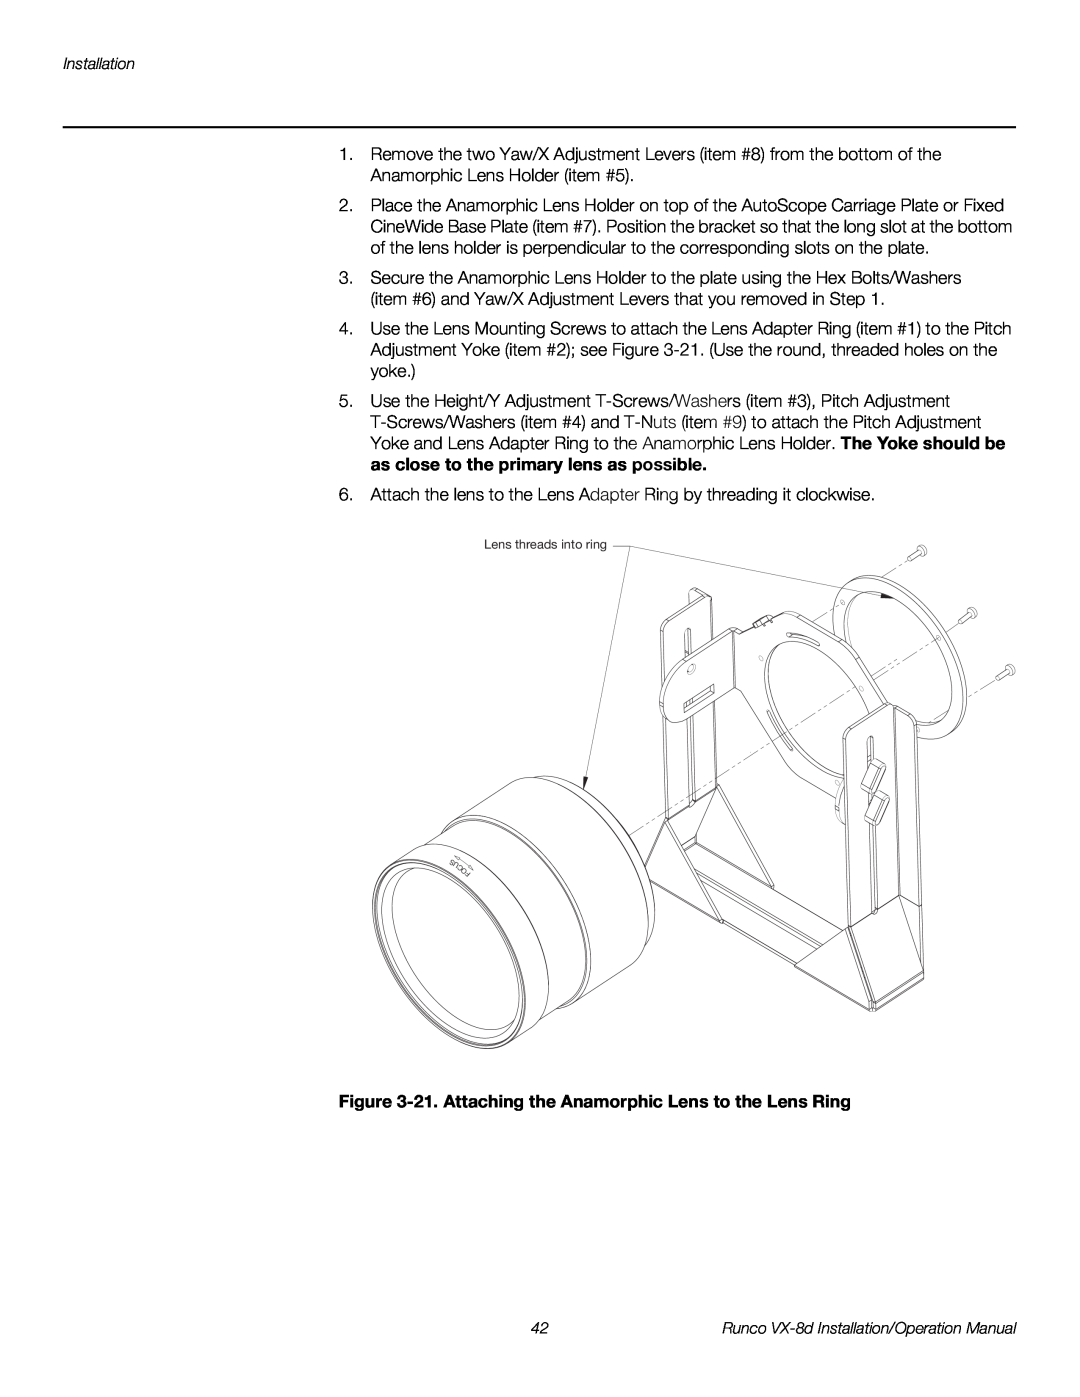 Runco VX-8D operation manual 21. Attaching the Anamorphic Lens to the Lens Ring 